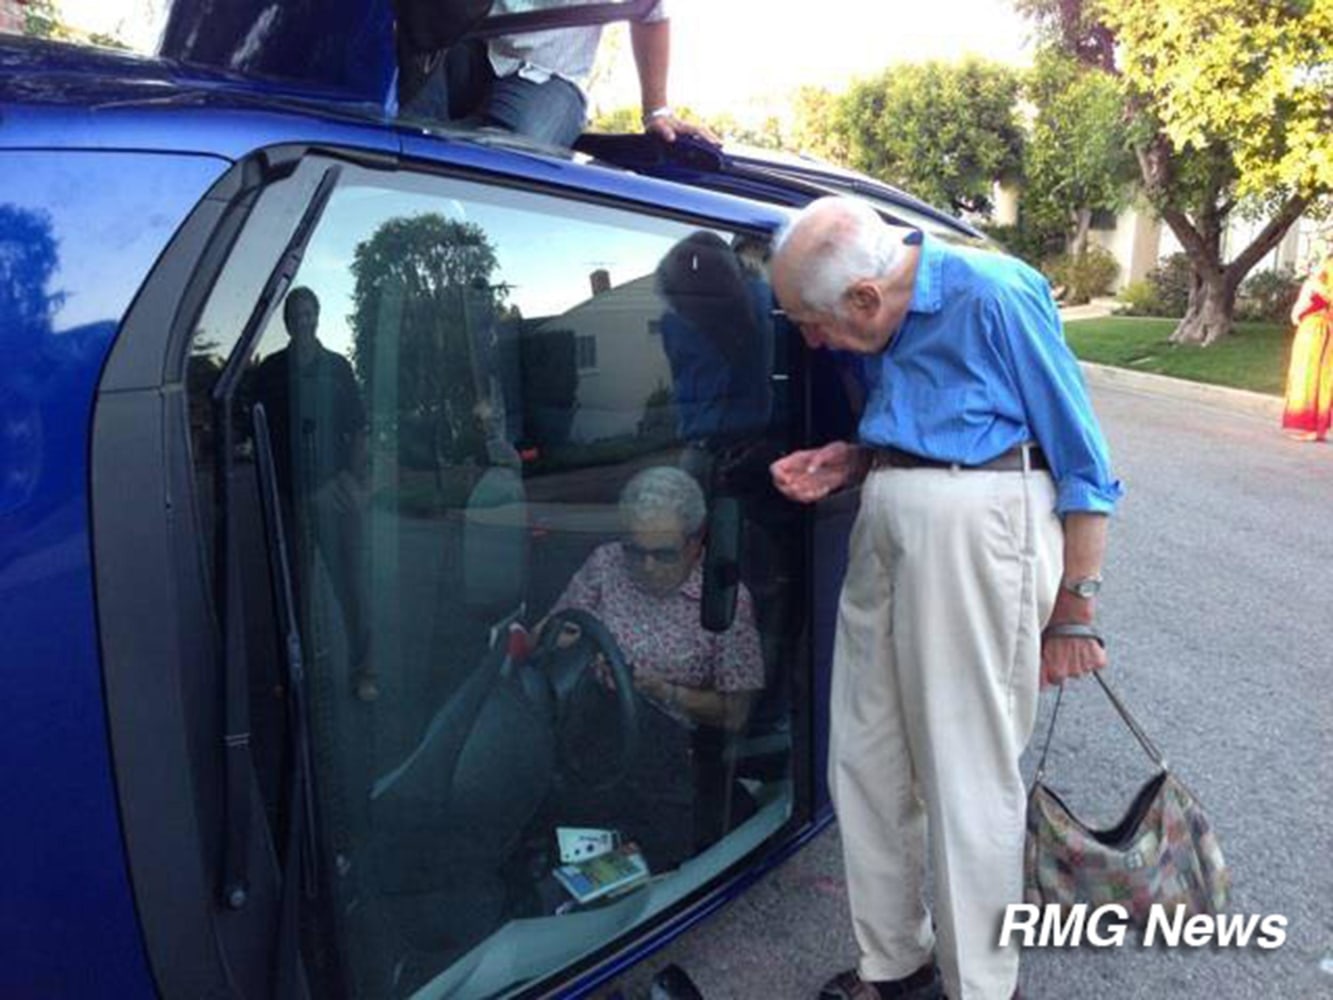 Elderly Couple Poses for Photo After Car Flips - NBC News